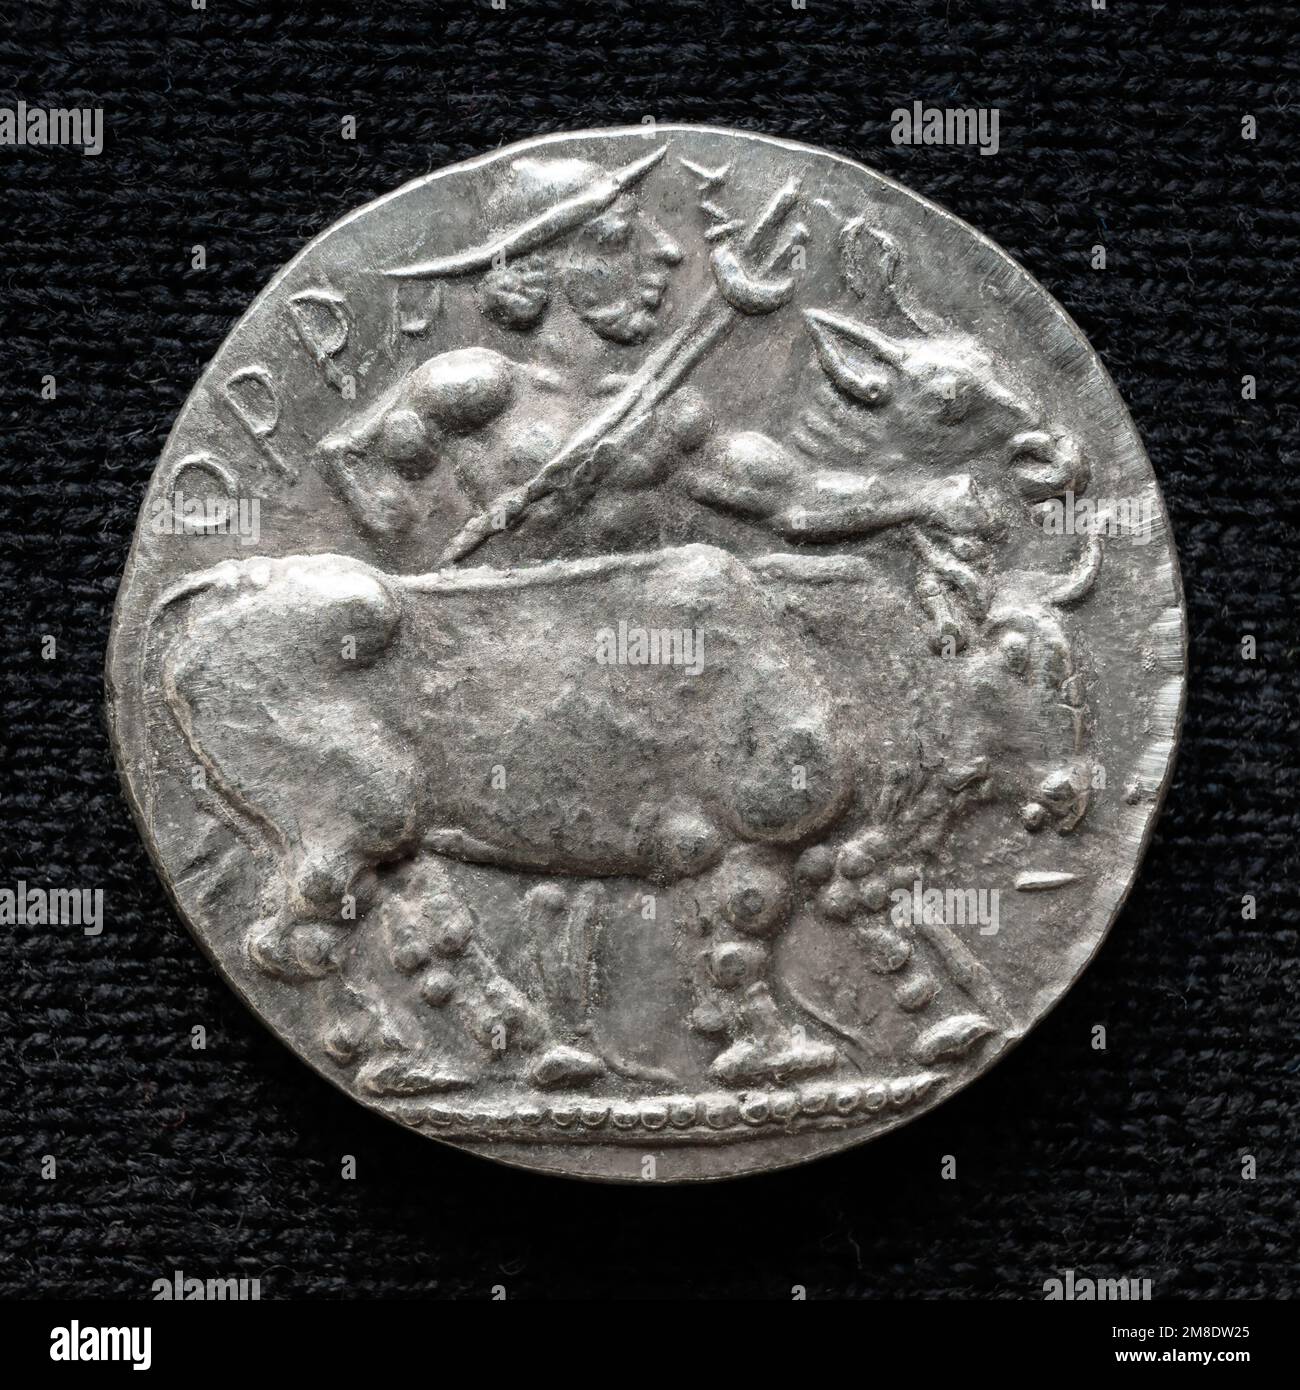 Ancient coin with image of bull, old rare money, silver artifact isolated on dark background, macro. Concept of Roman and Greek coin, past civilizatio Stock Photo